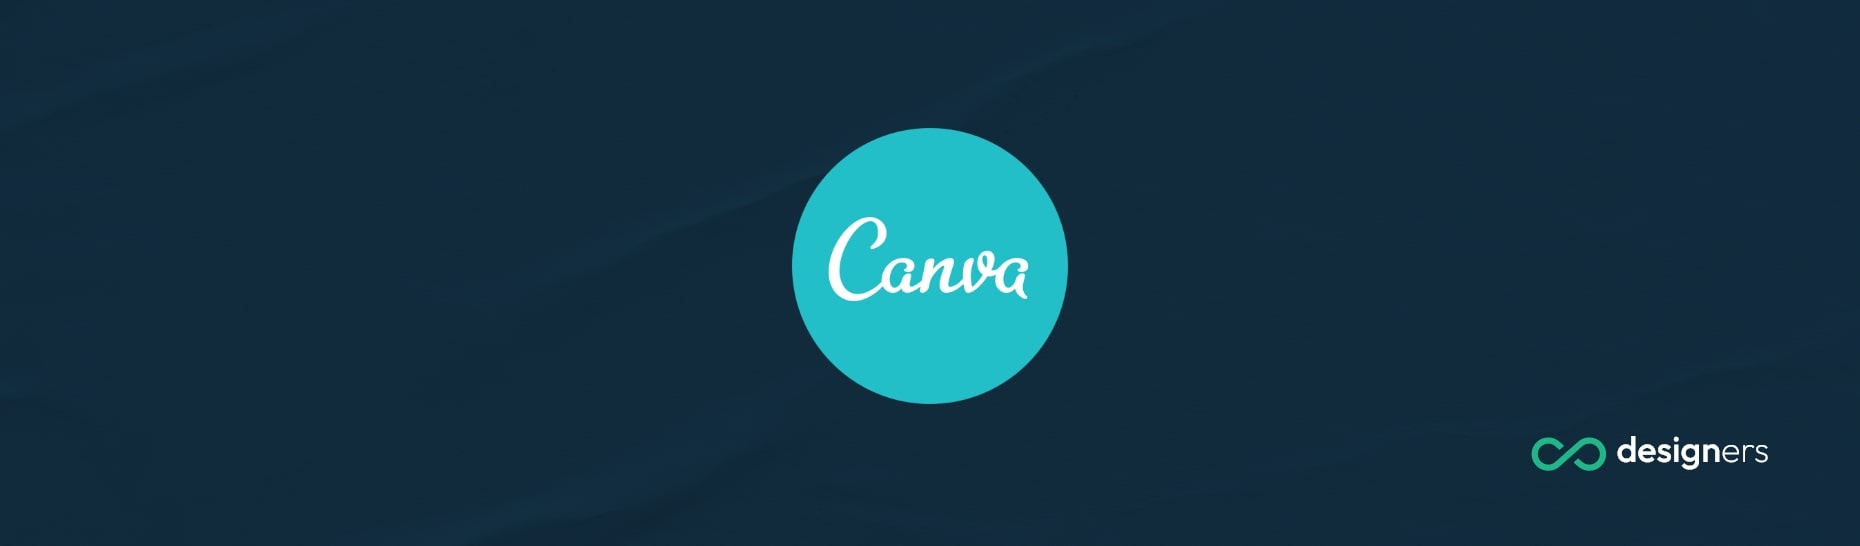 Can I Make a Vector File in Canva?